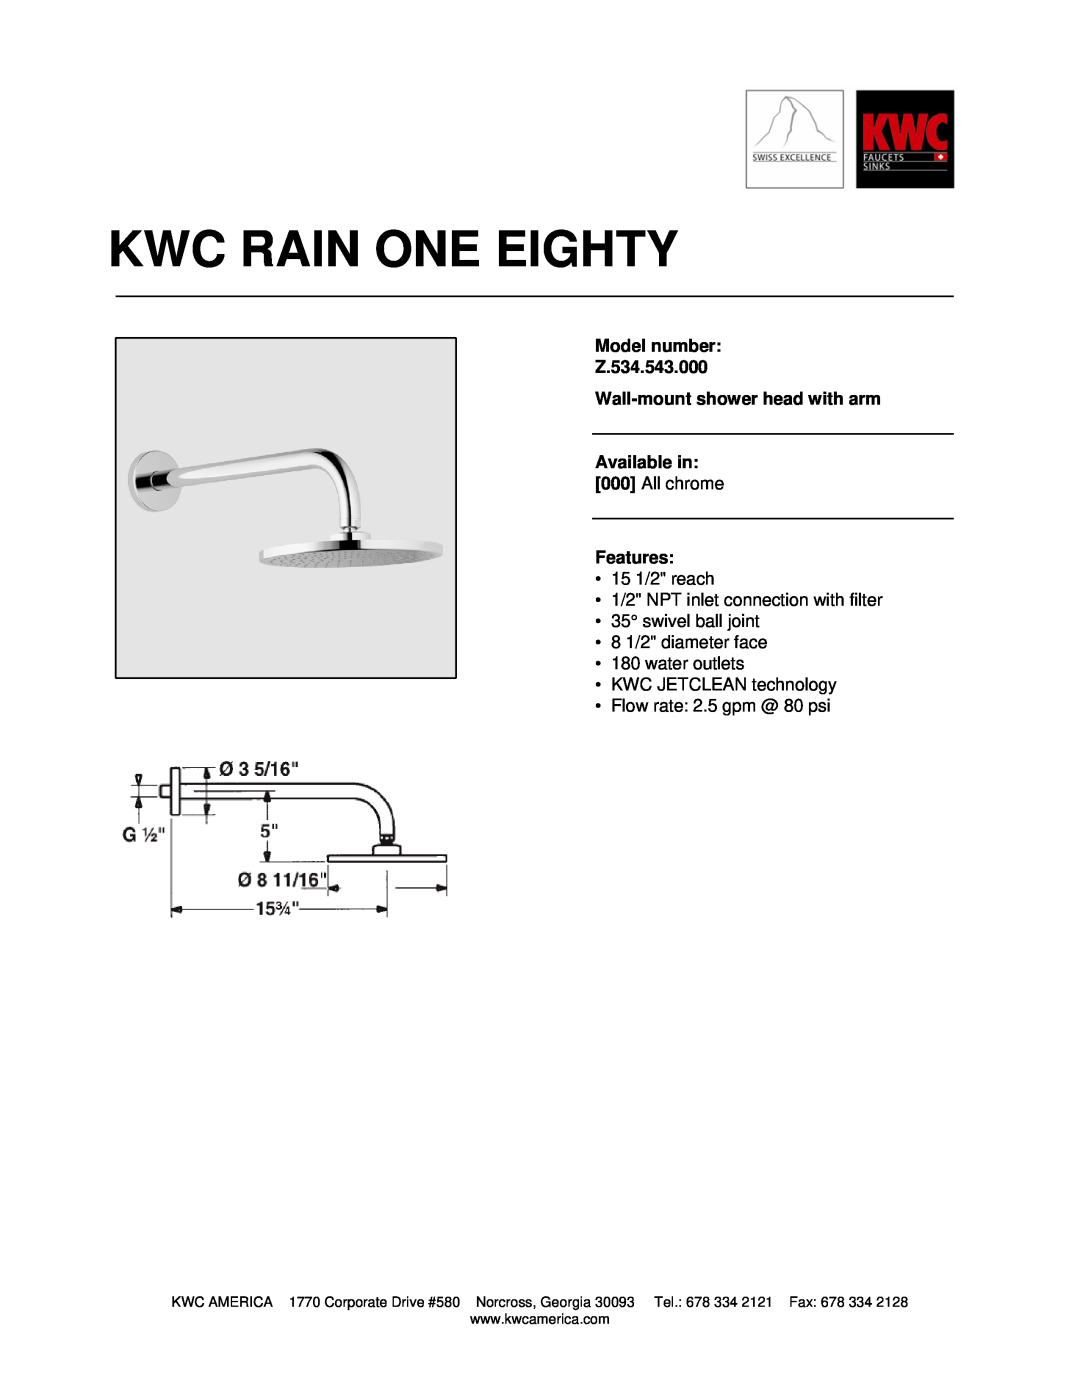 KWC manual Kwc Rain One Eighty, Model number Z.534.543.000, Wall-mountshower head with arm Available in, All chrome 